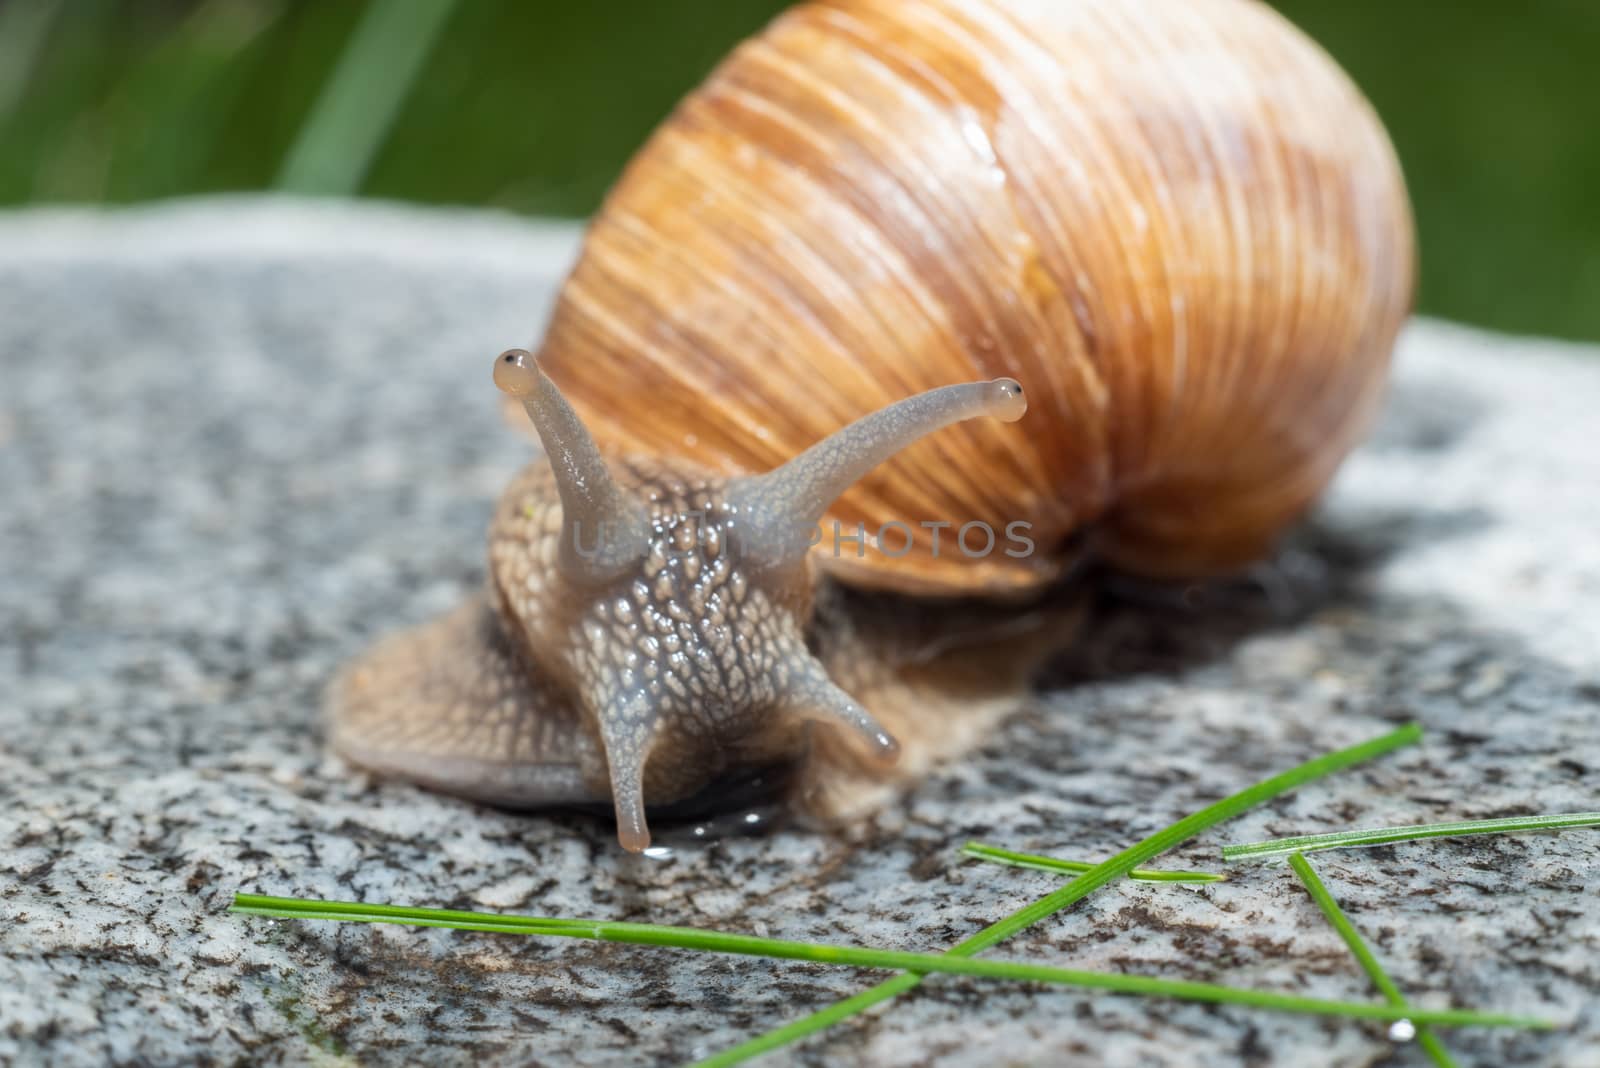 Macro close-up of a Roman snail with its antennae fully extended - looking to the right by Umtsga